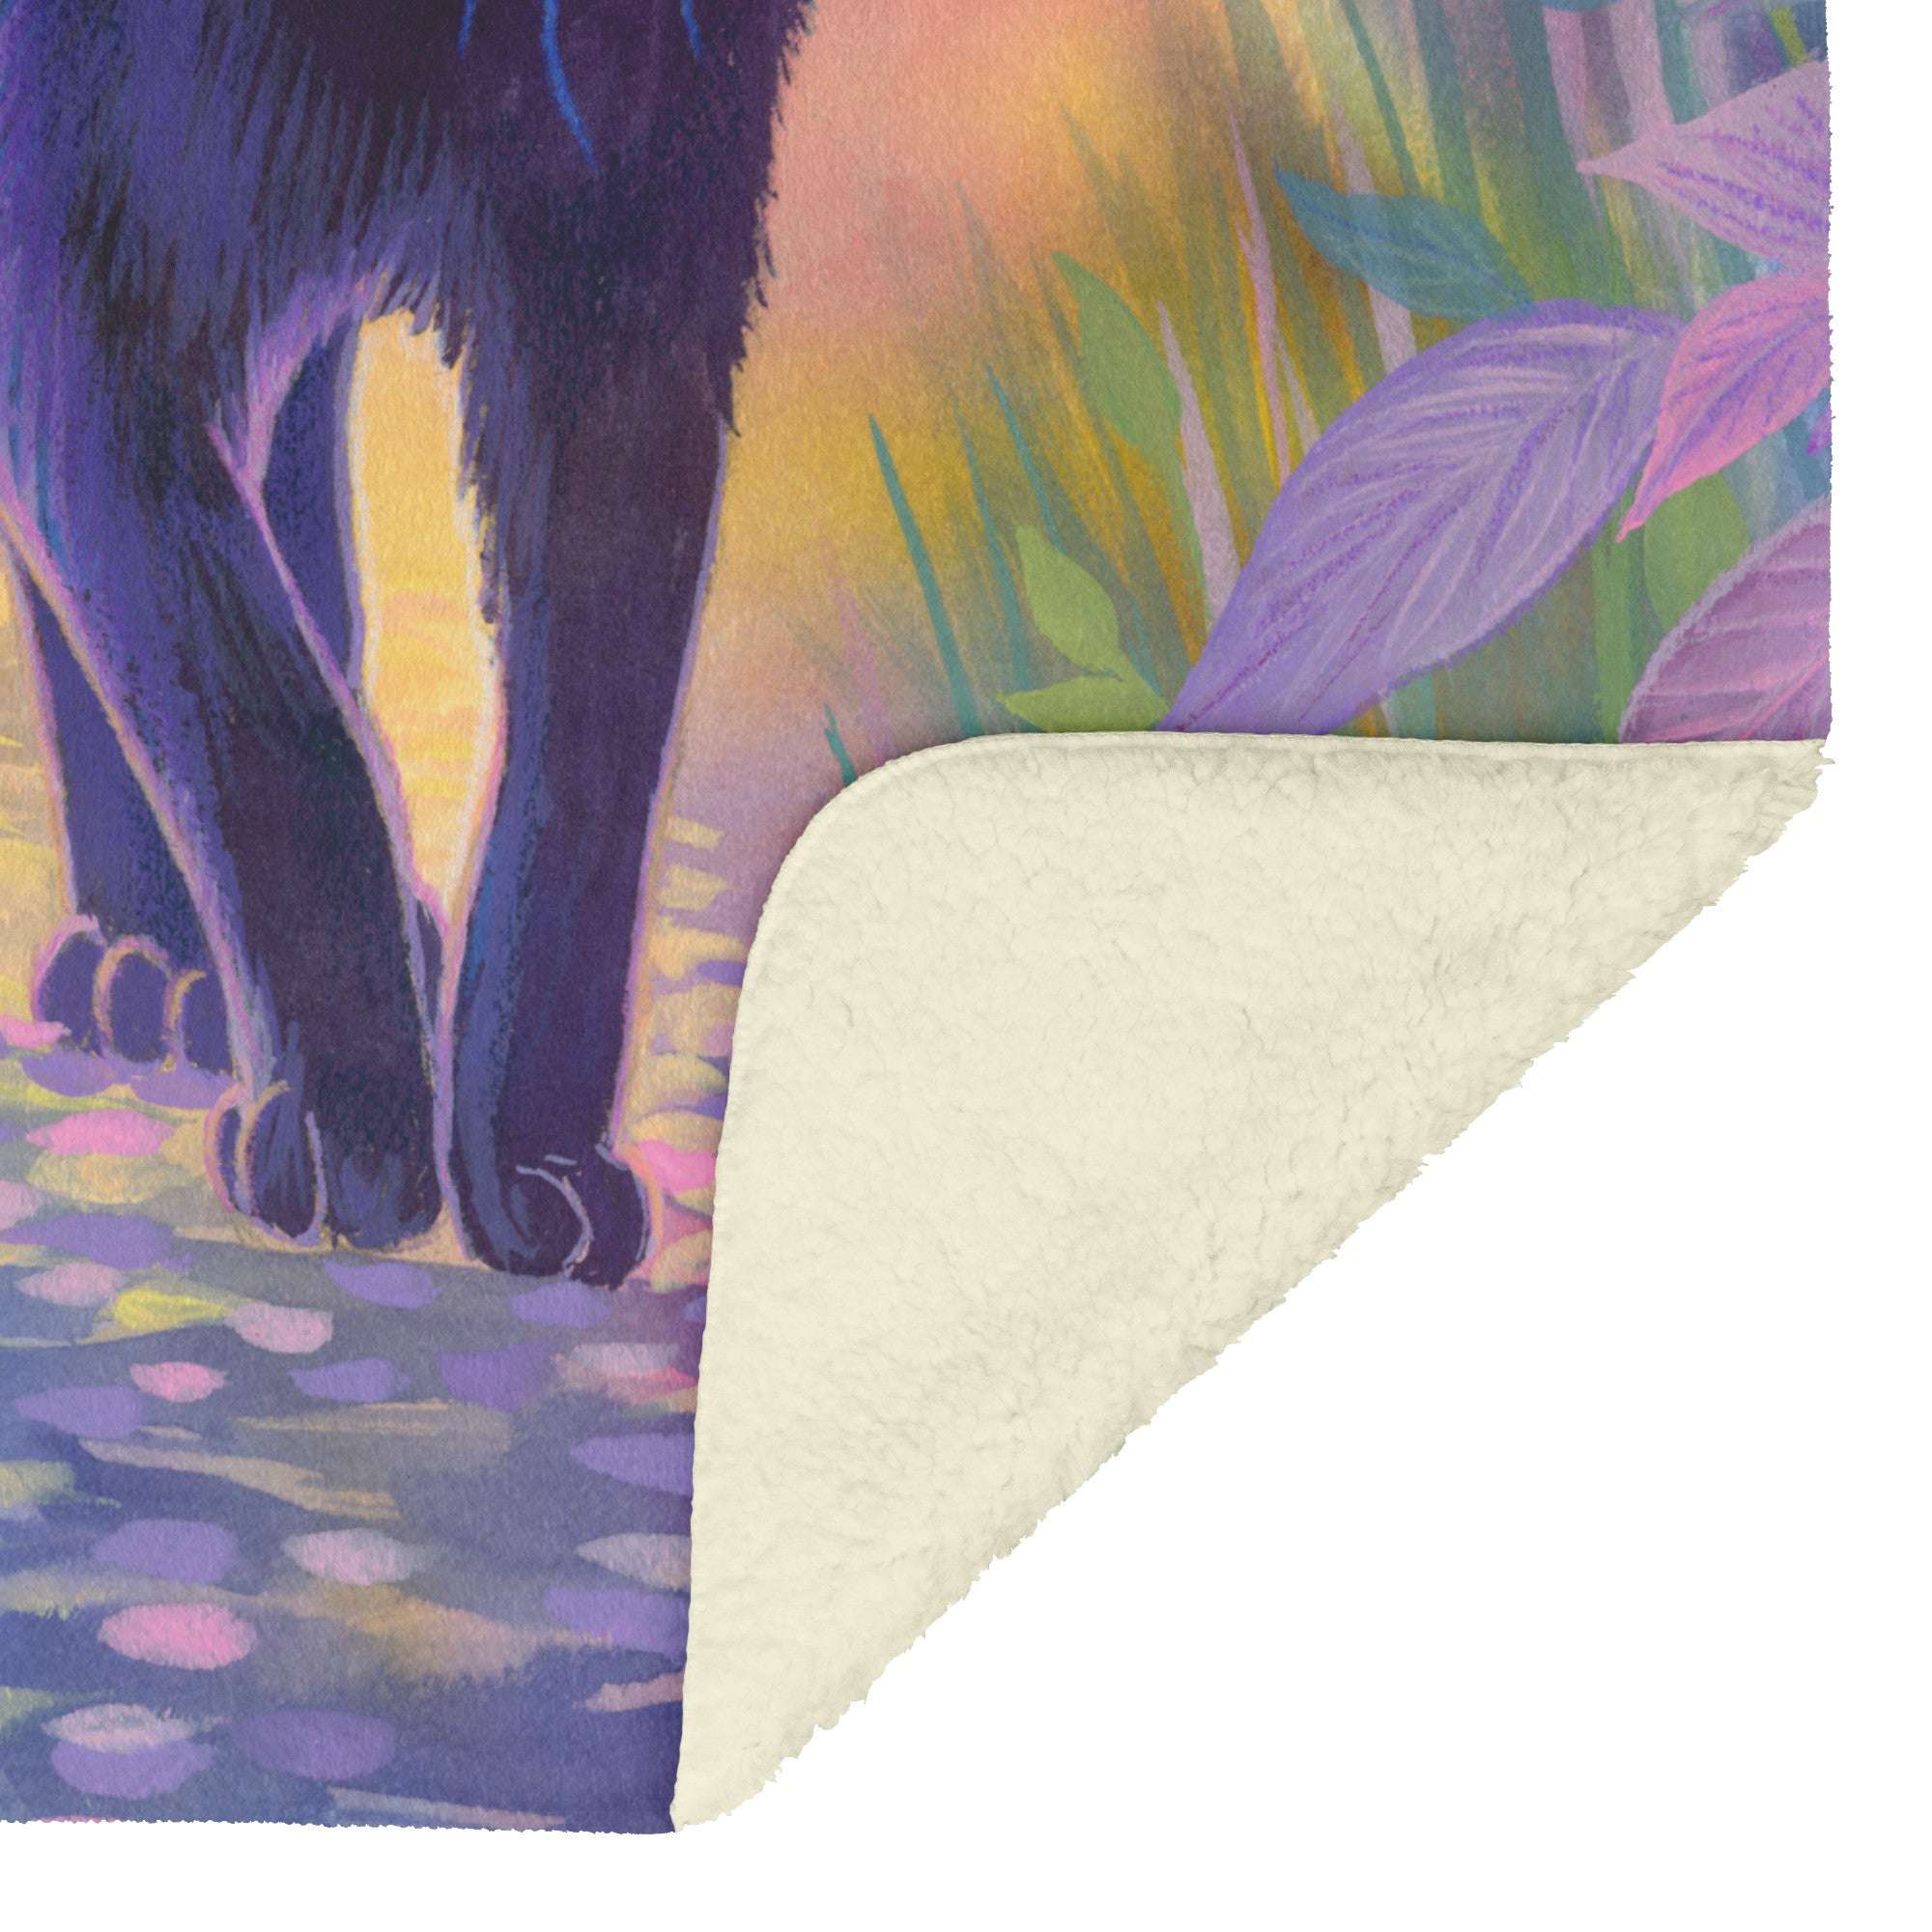 Illustration of a black cat walking on a stone path with colorful foliage in the background, showing the sherpa fleece underside of the Cat Blanket